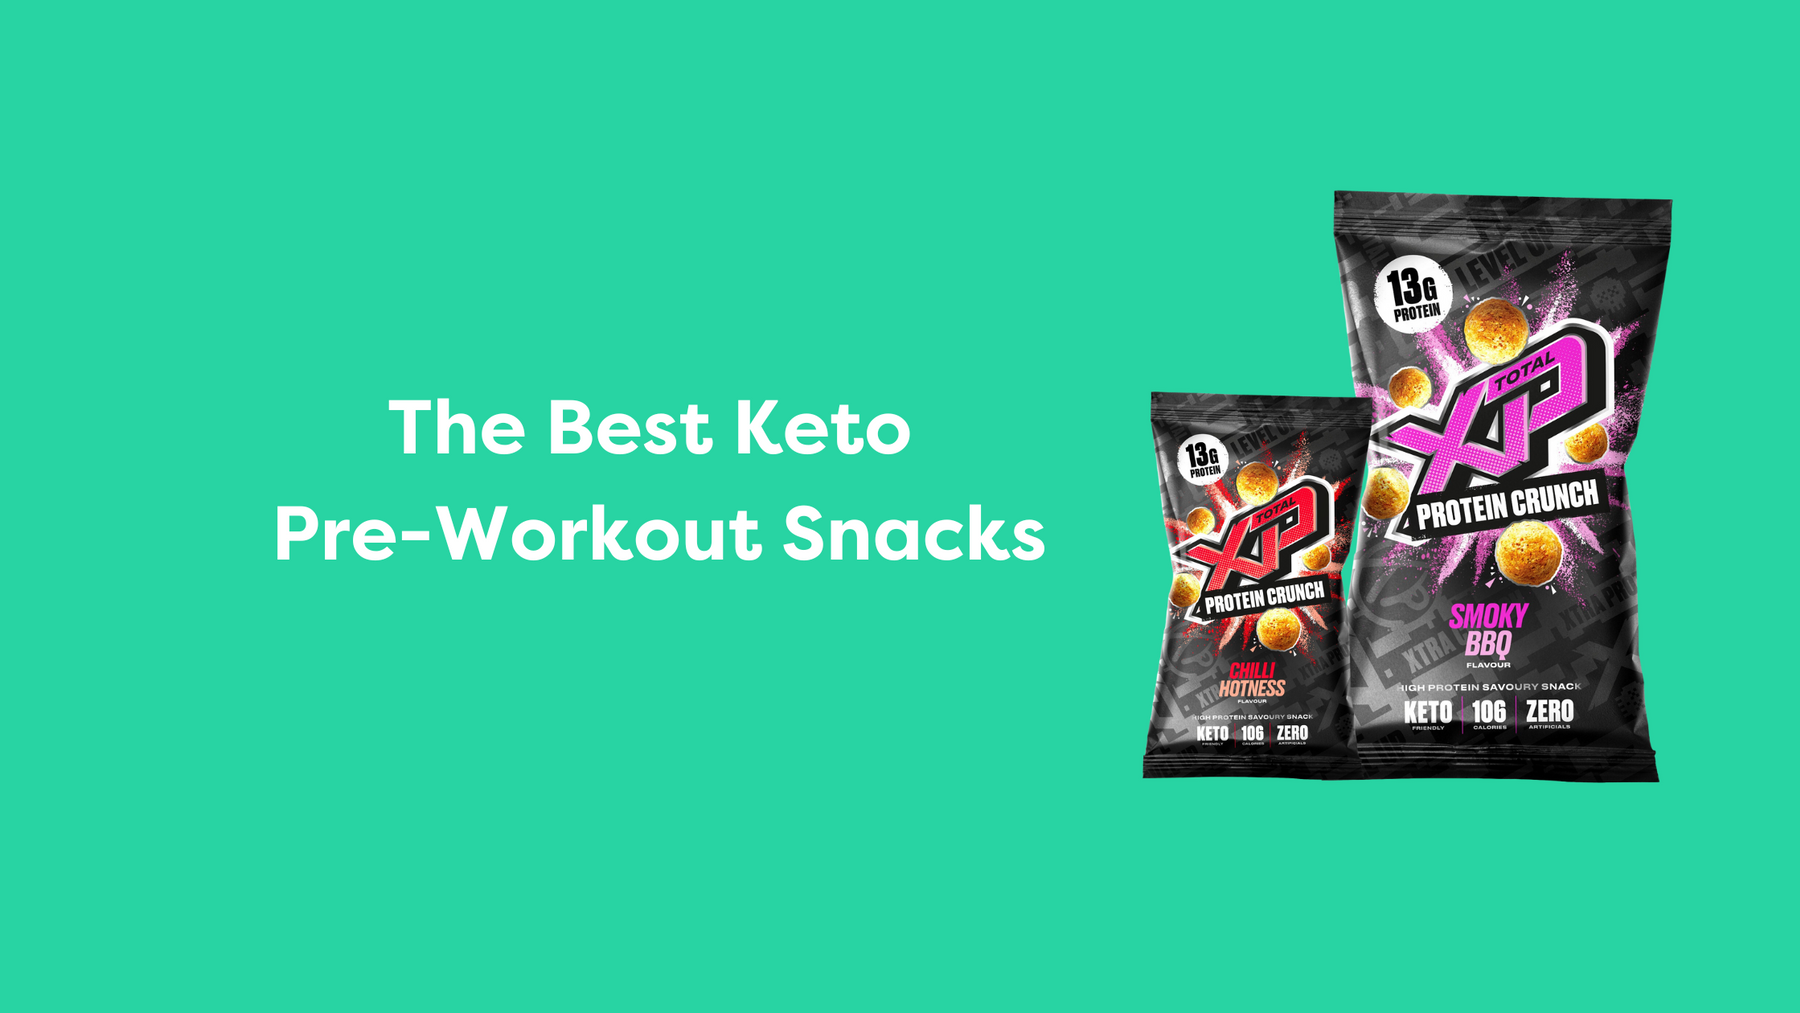 The Best Keto Pre-Workout Snacks